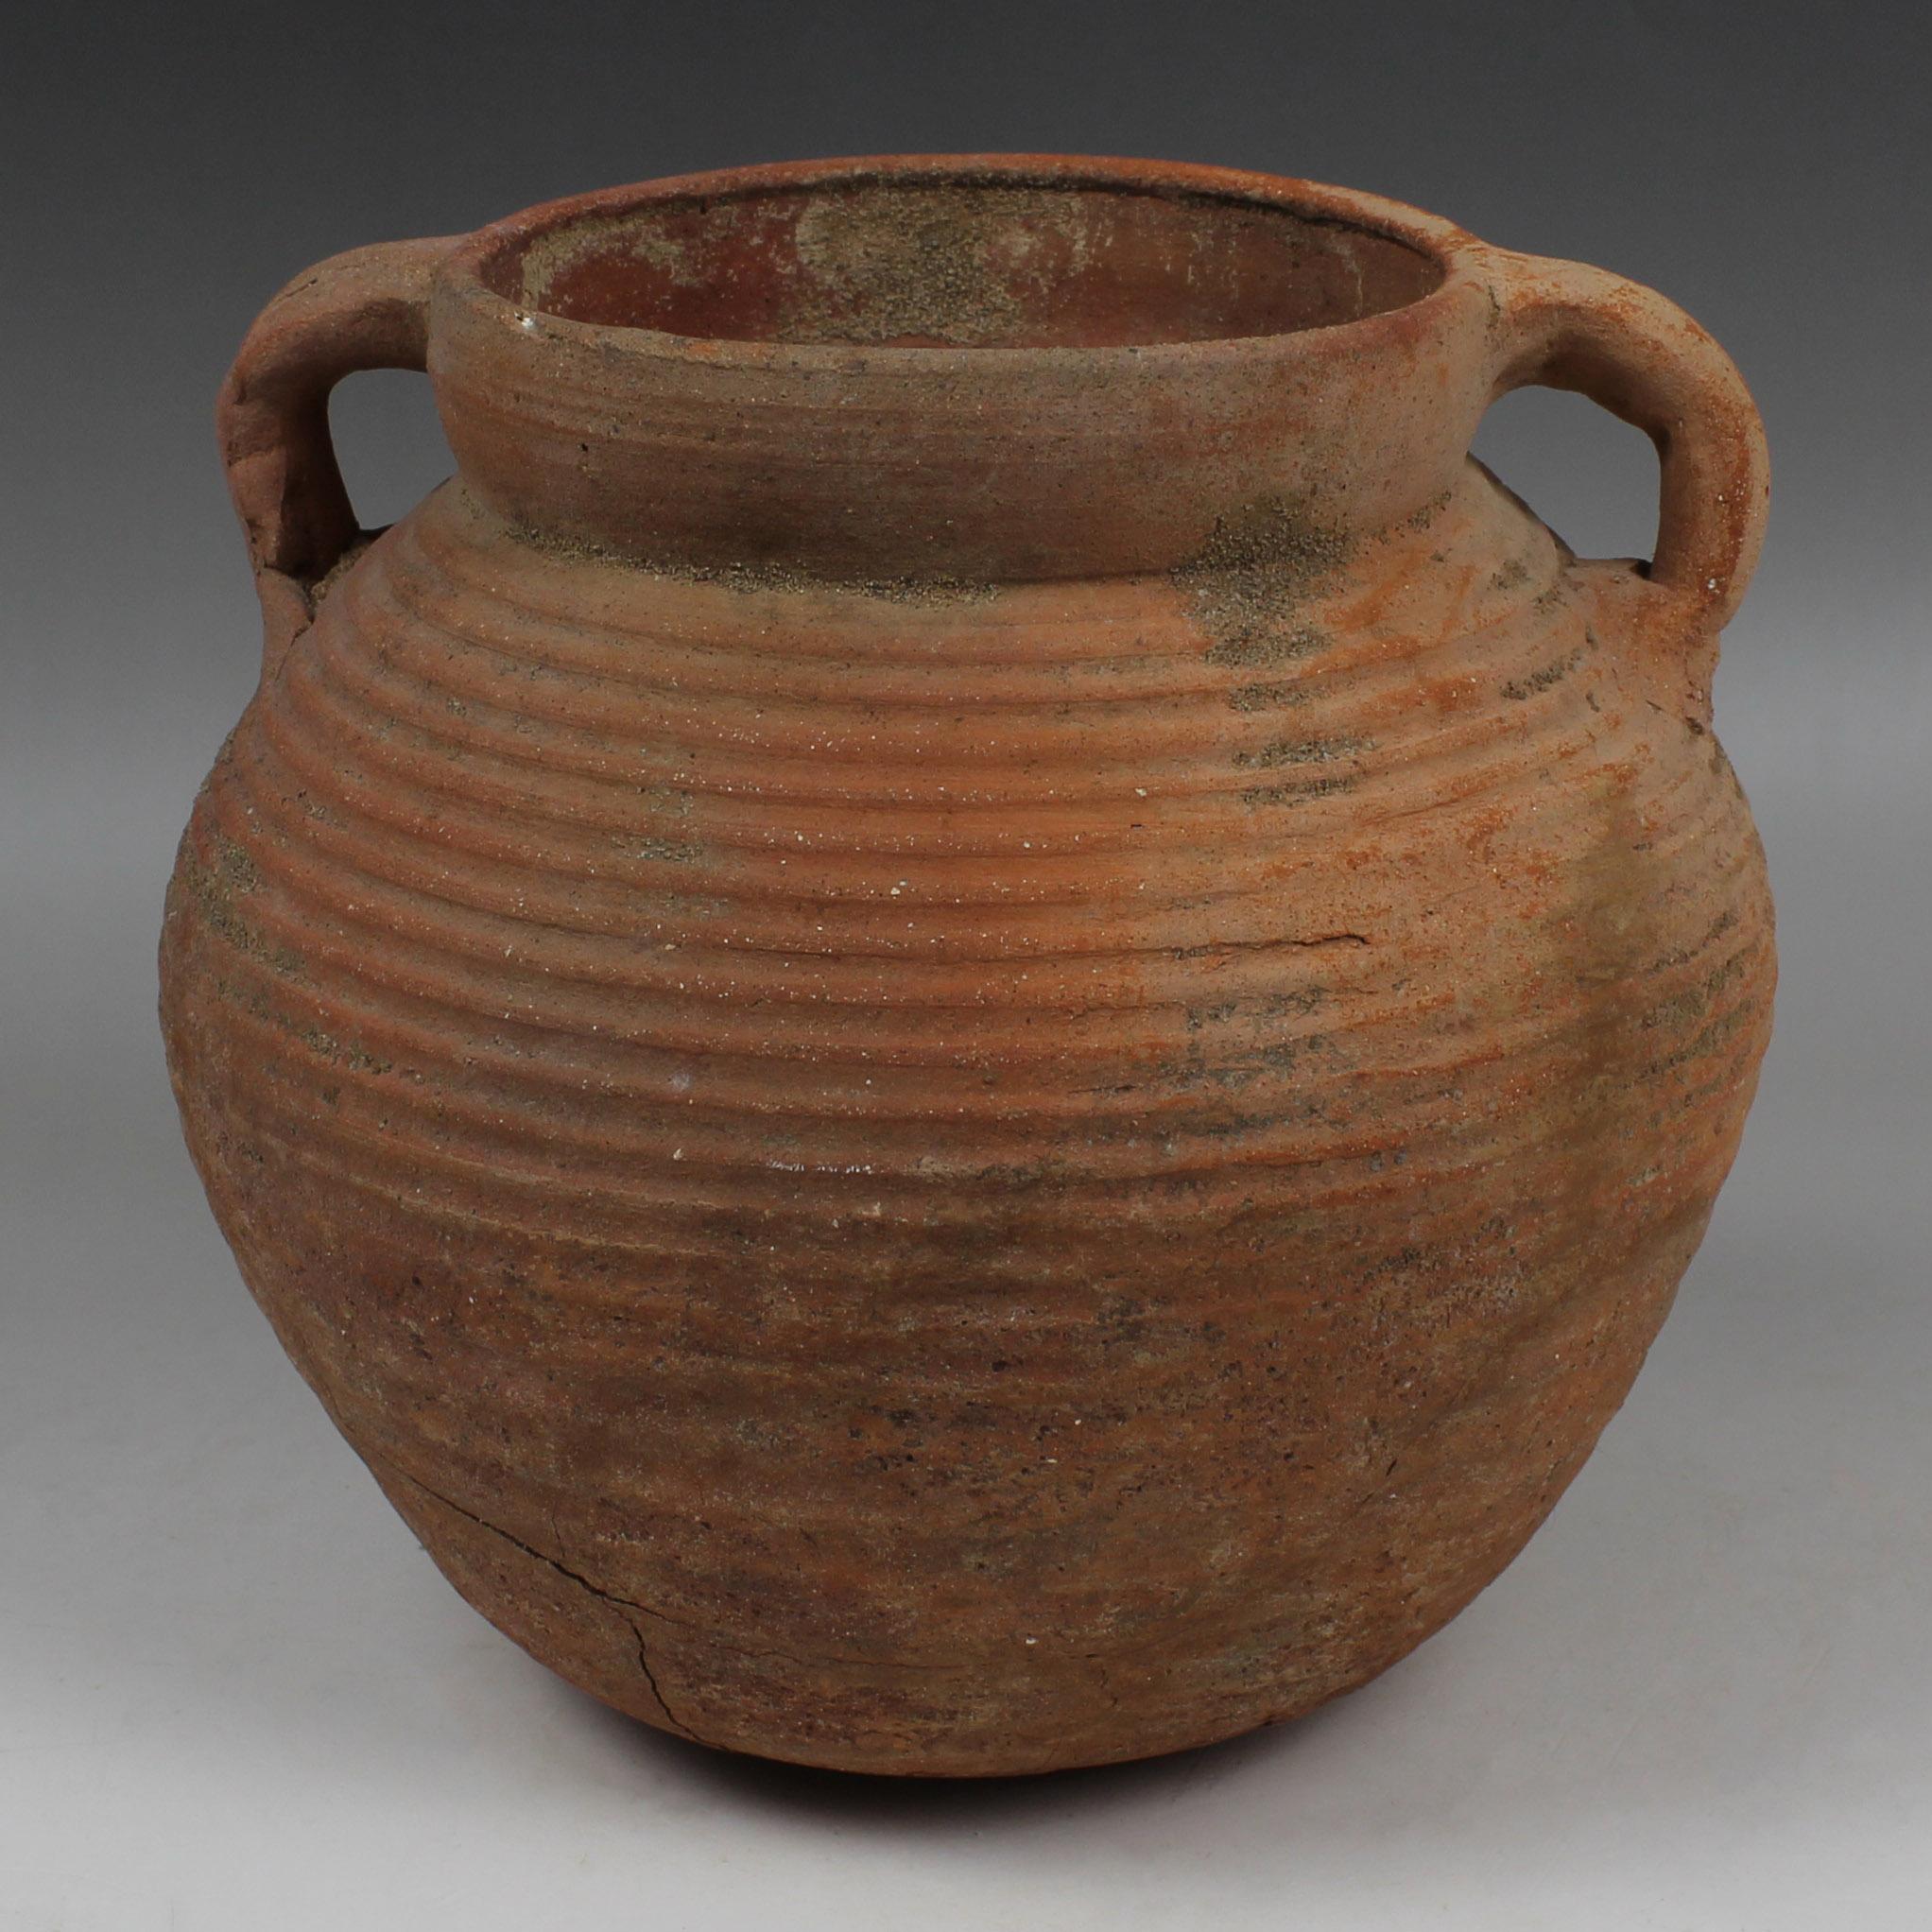 18th Century and Earlier Roman cooking pot, Type ‘Kedera’